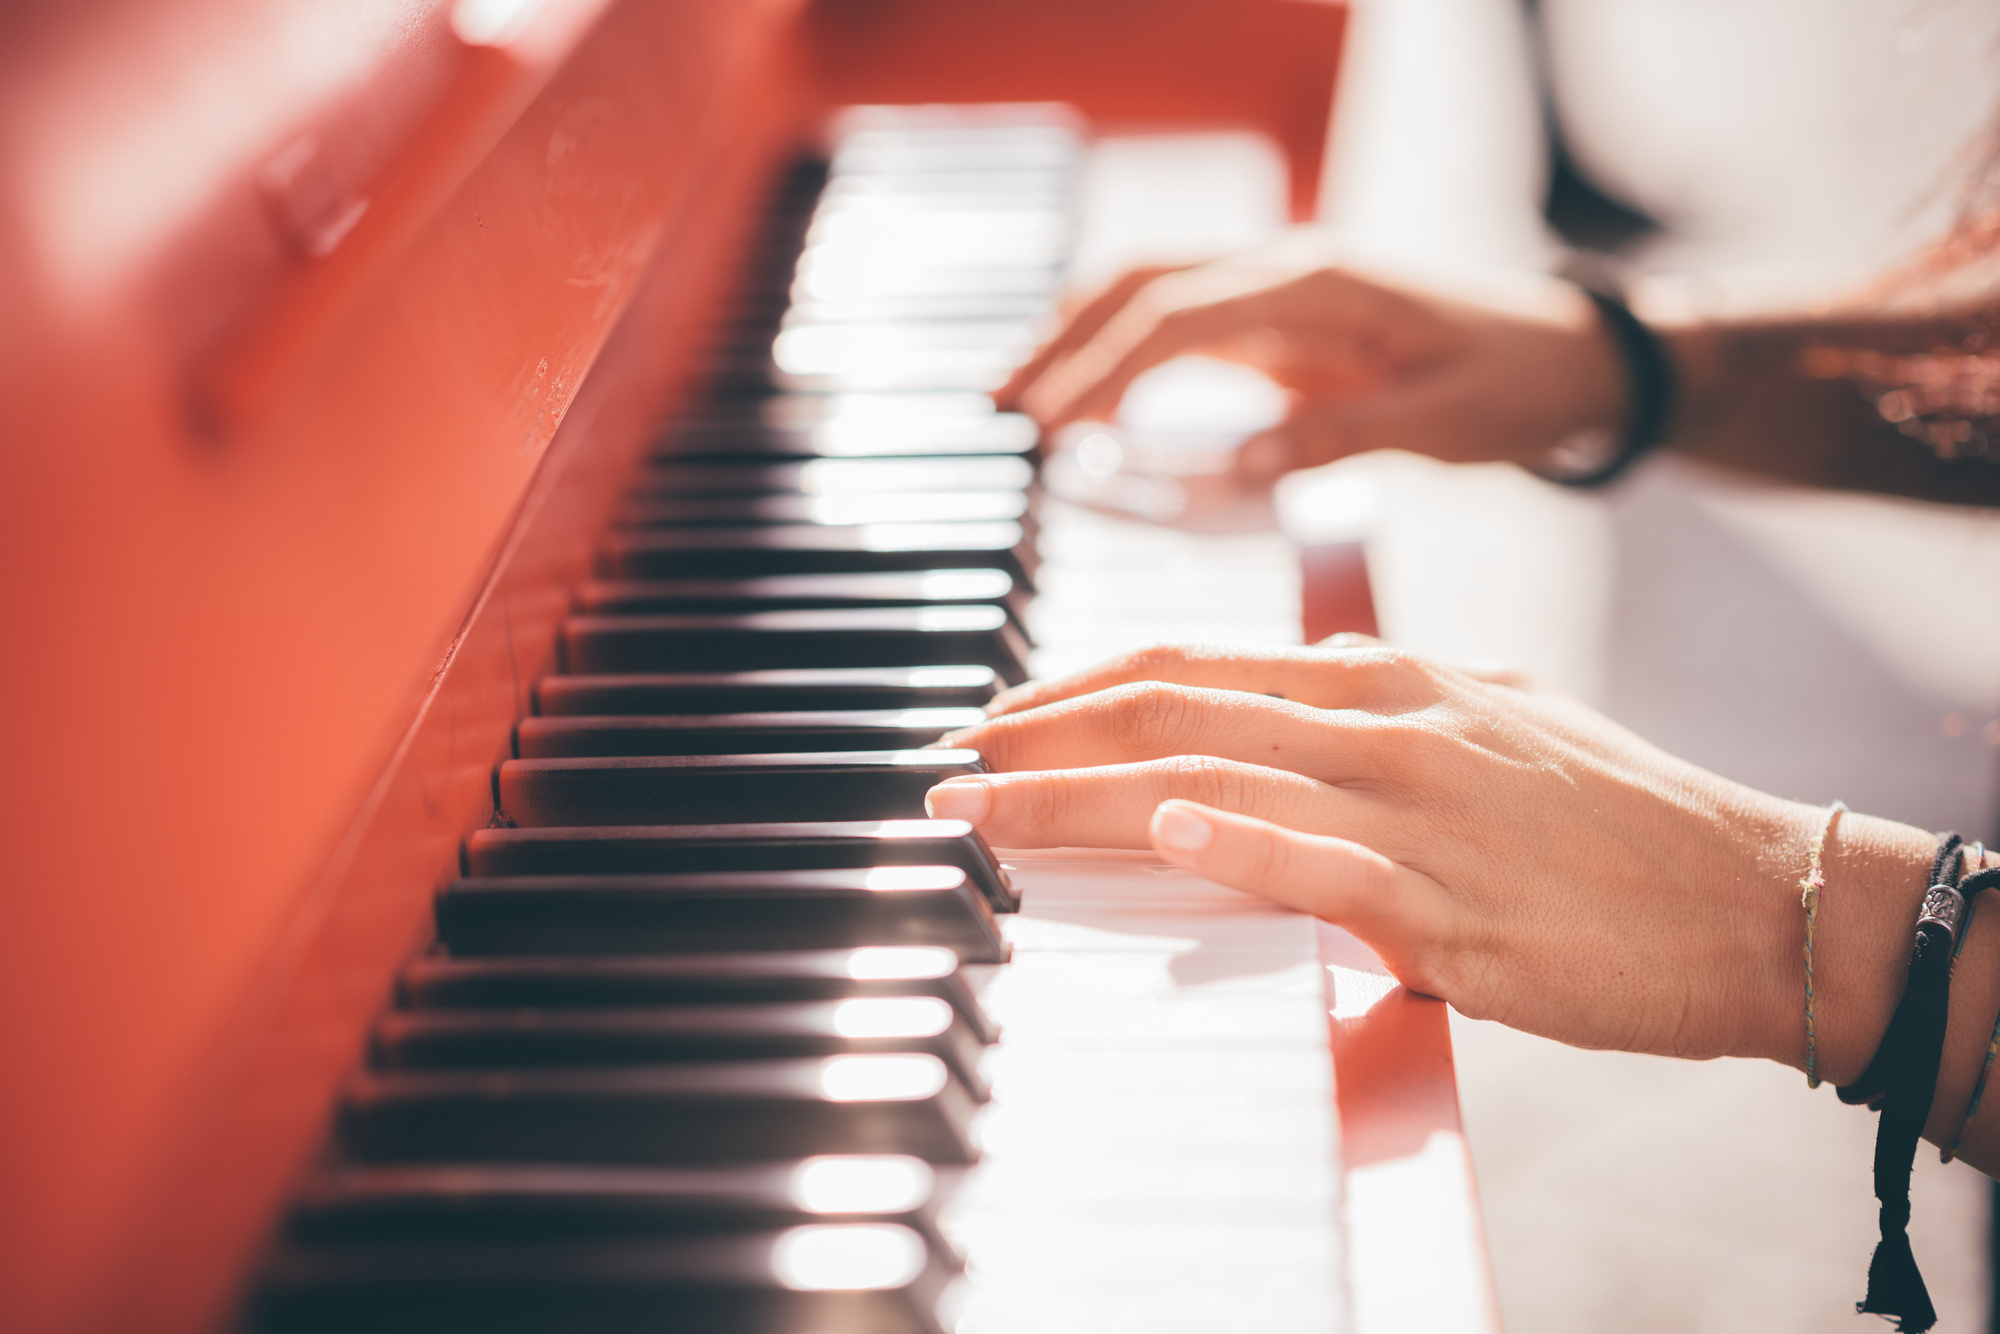 How to Make the Most of the Connection Between Music and Dementia